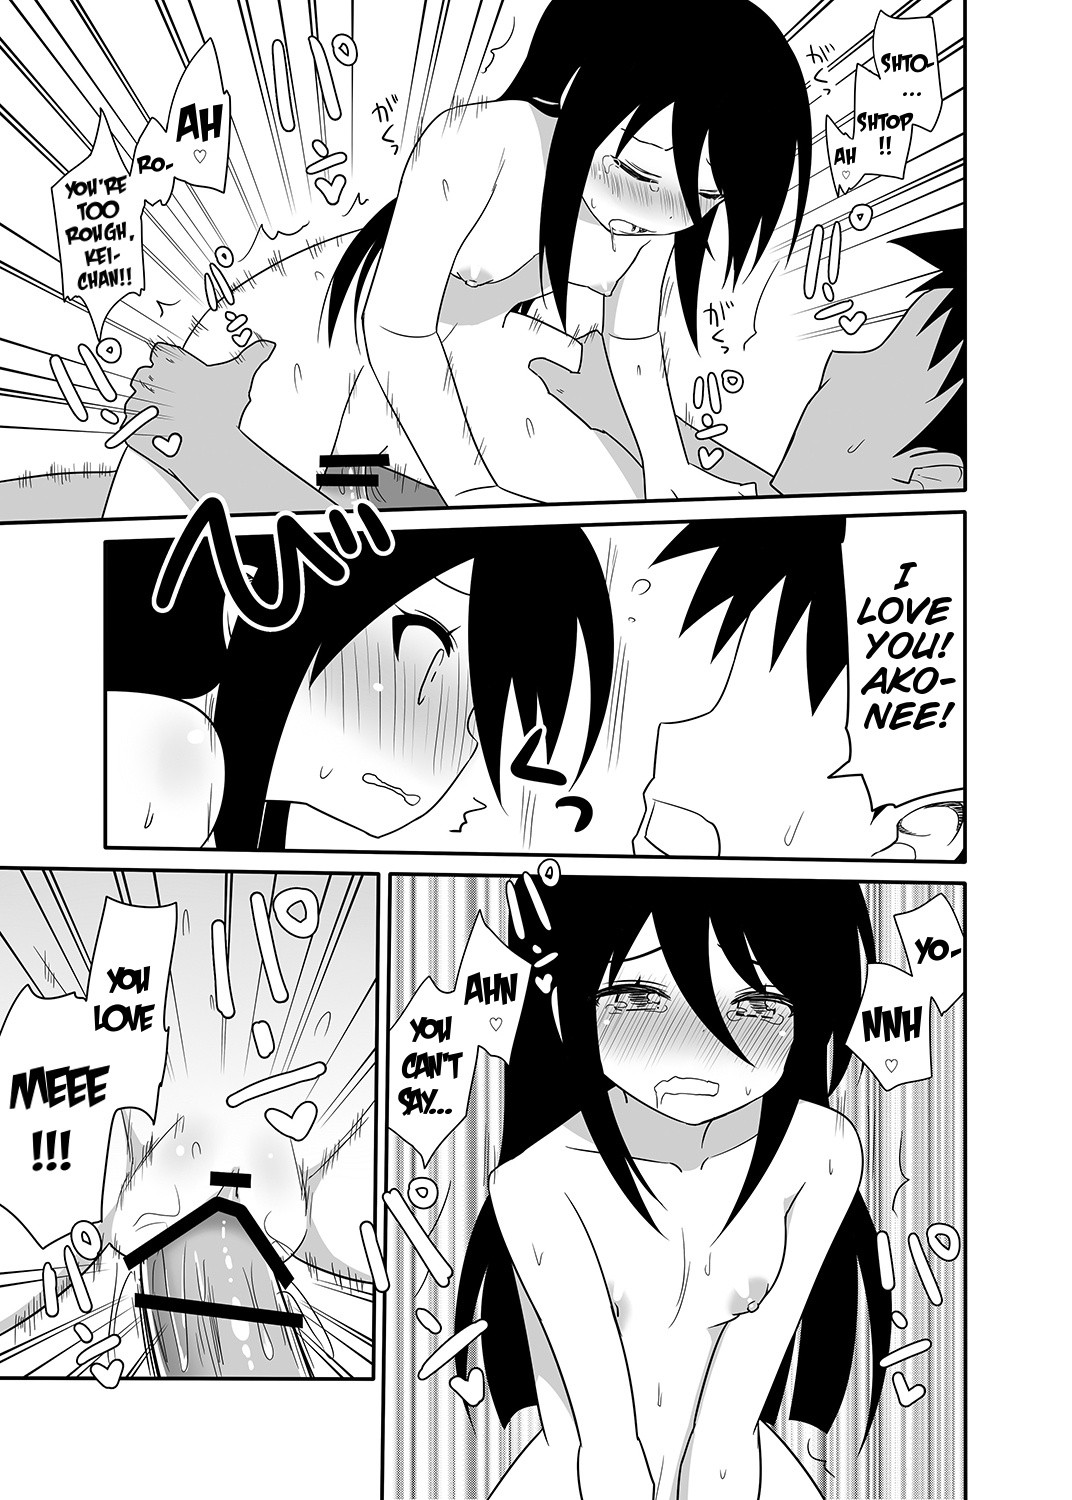 The day I went over the line with Ako-nee hentai manga picture 18